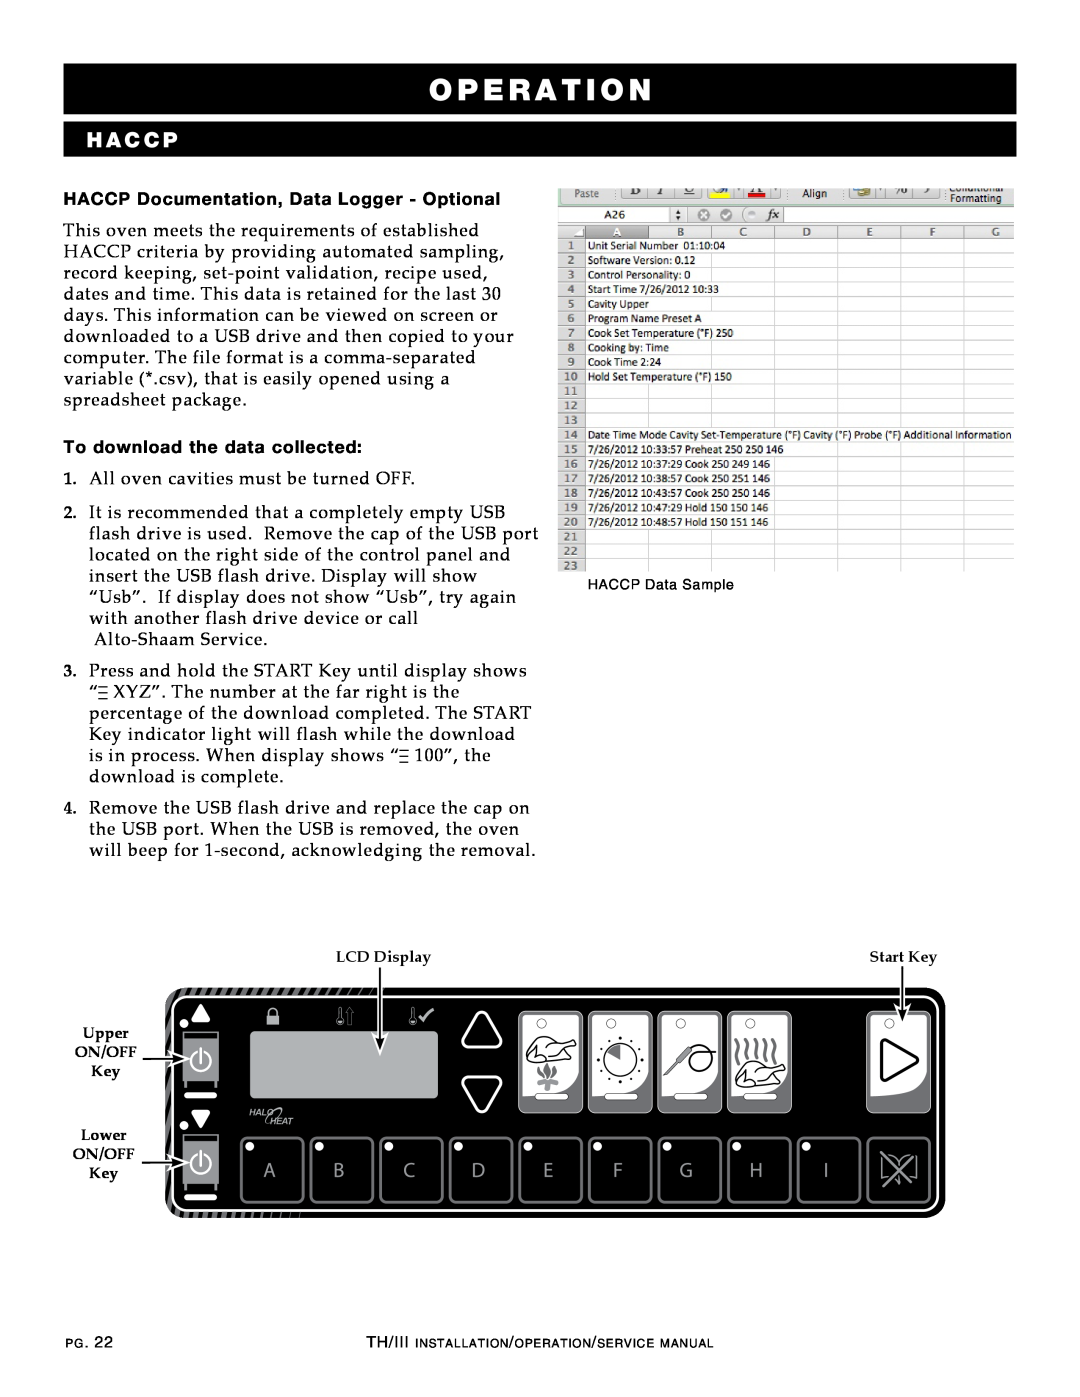 Alto-Shaam 300-TH/III Hac C P, OPE R A Ti o n, HACCP Documentation, Data Logger - Optional, To download the data collected 